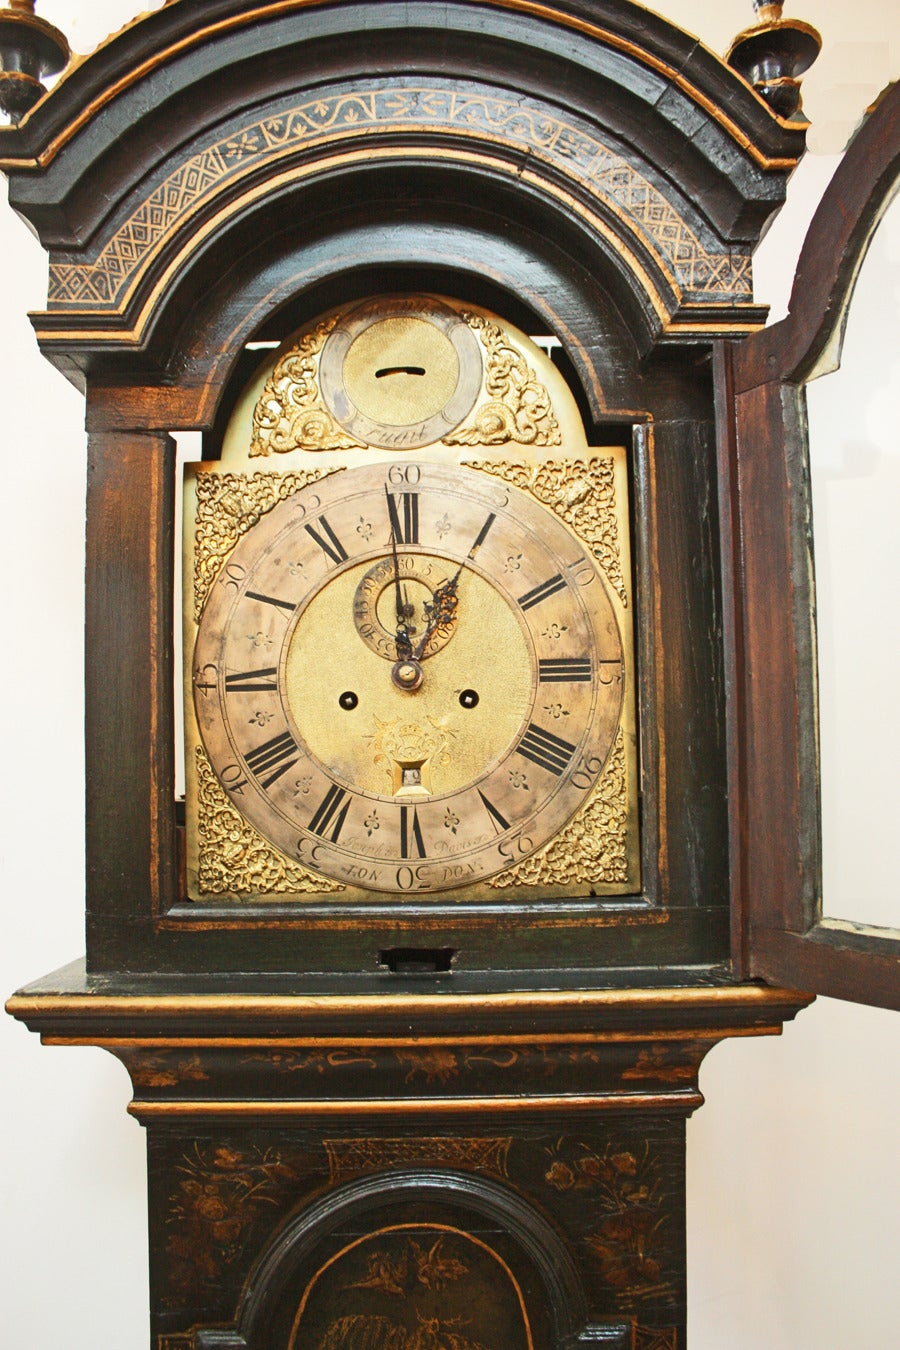 a George II black and gilt- japanned long case clock, arched bonnet supported  by columns and enclosing a circular dial with Roman and Arabic numerals. Inscribed Joseph Davis London (bottom of face) and Tempus Fugit or 